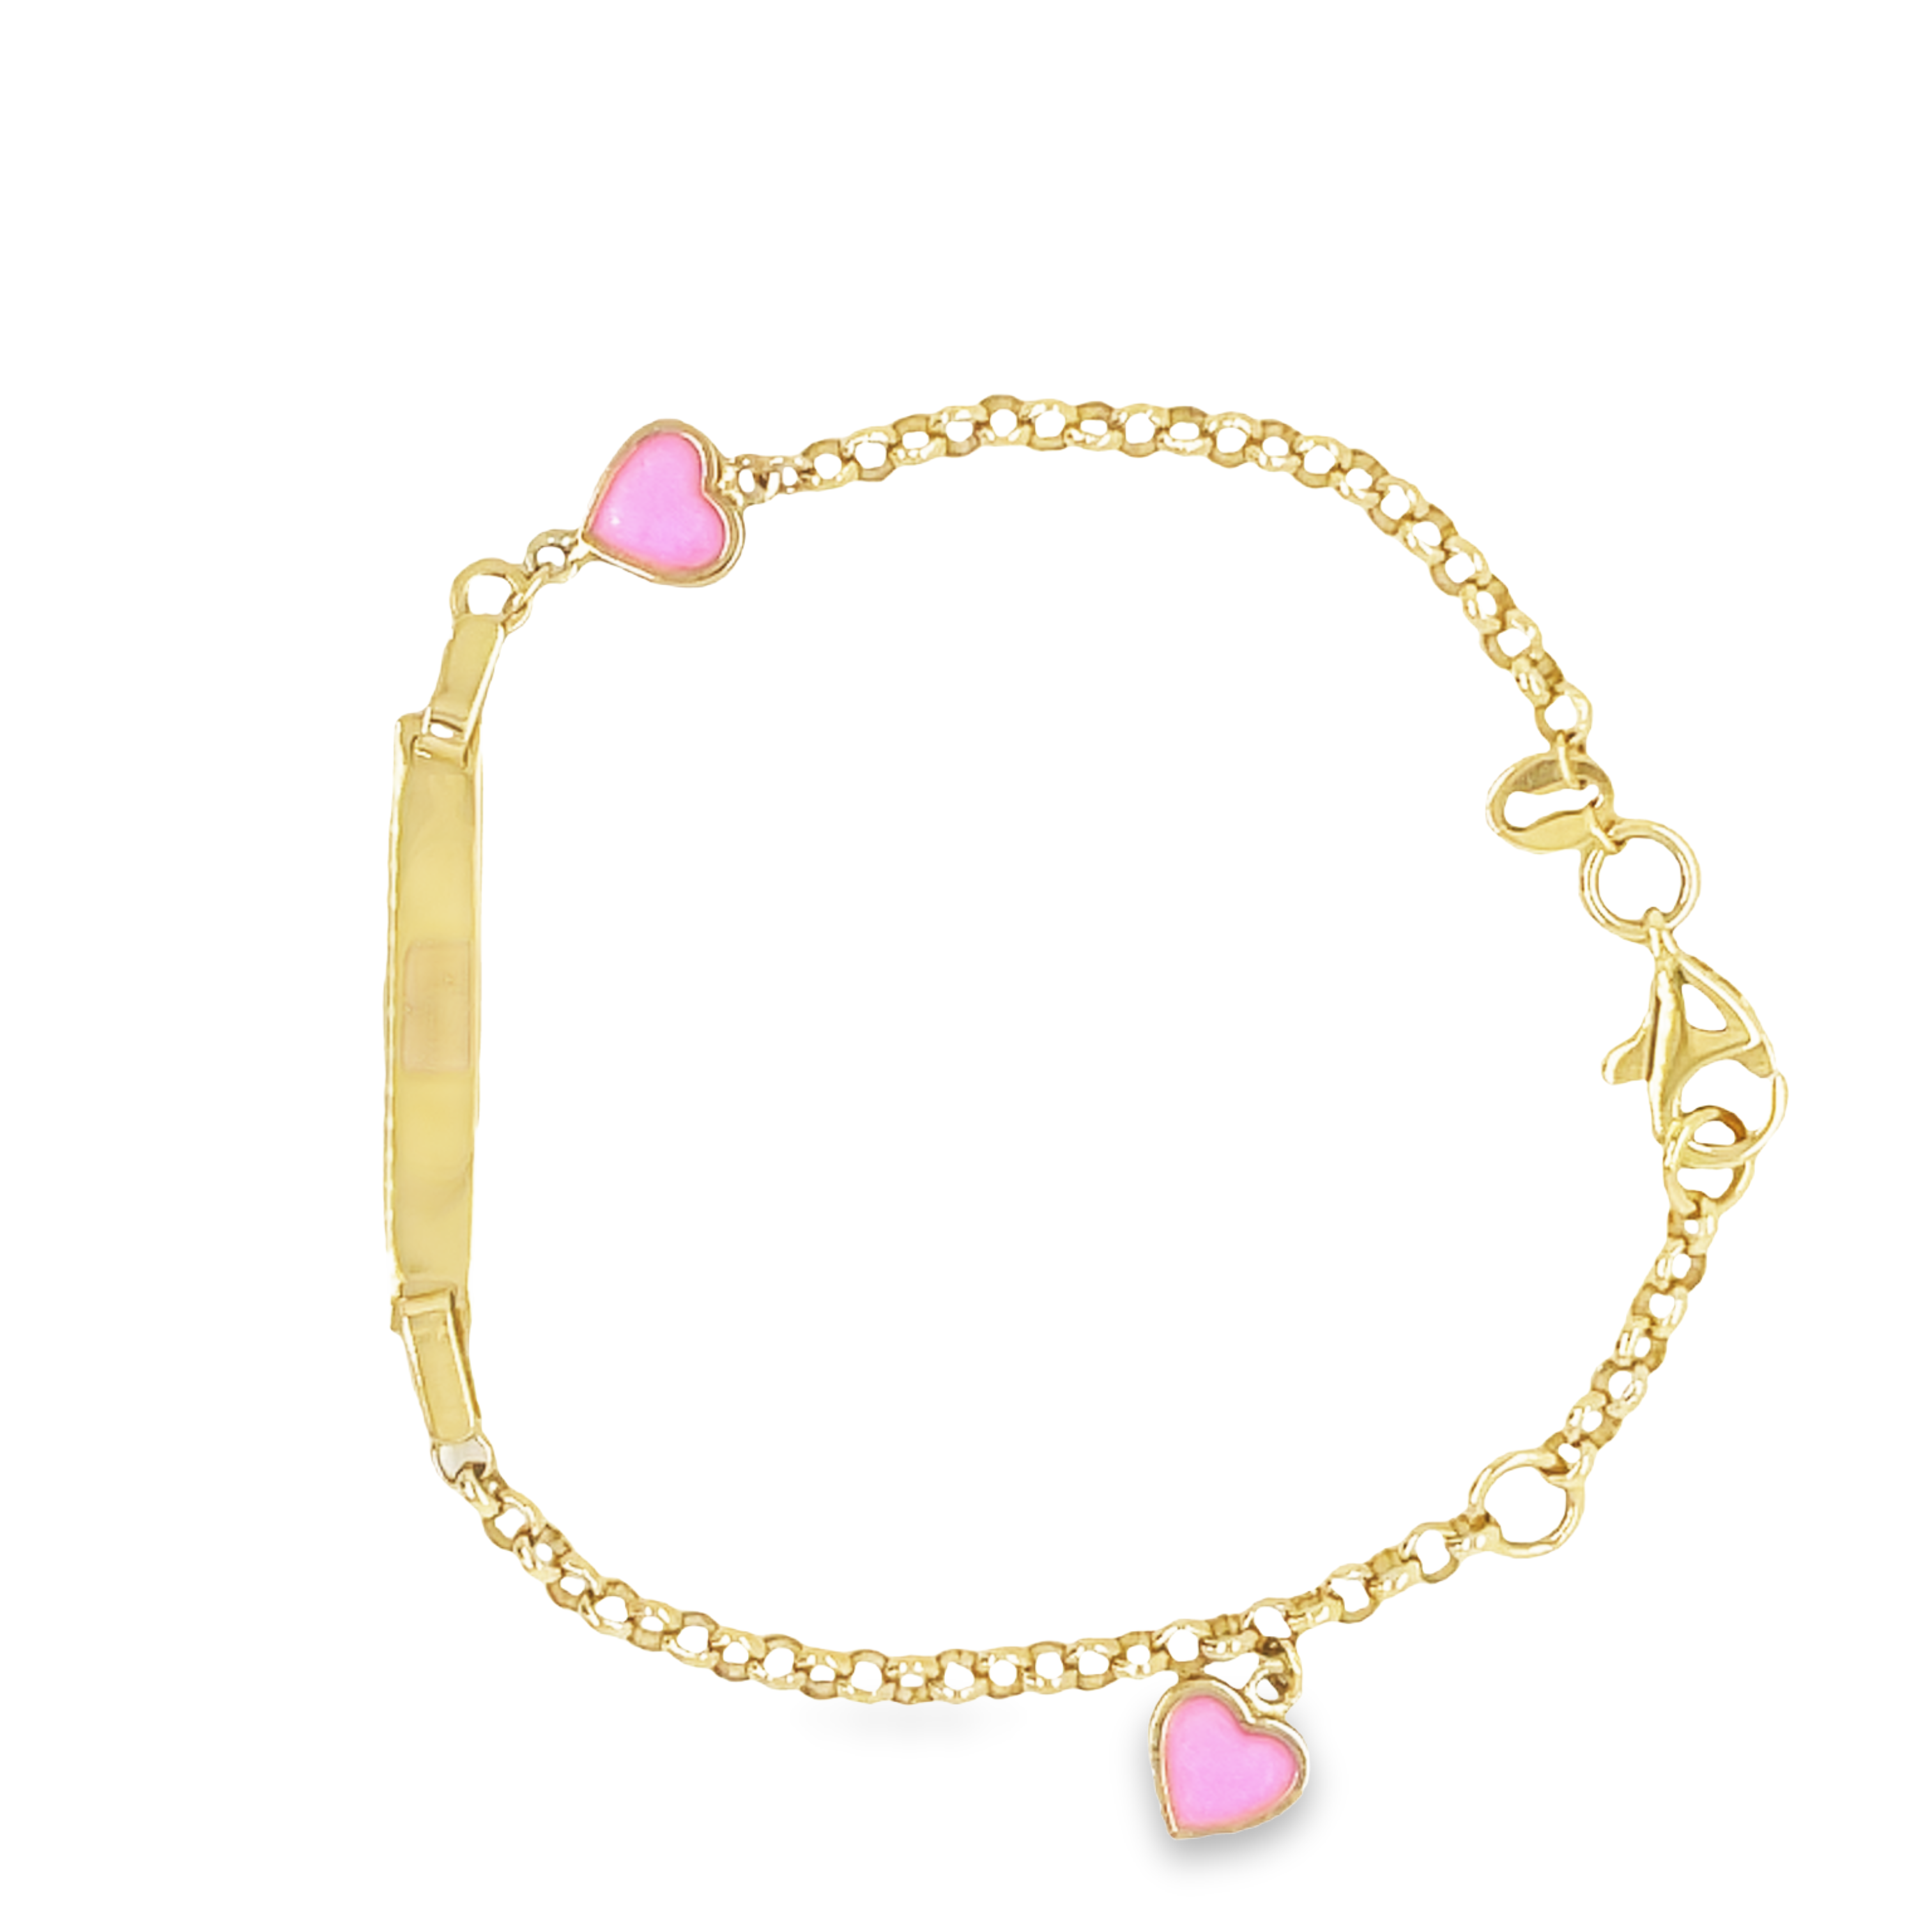 Delight your child with this ID Heart Children Bracelet. Crafted in 14k yellow gold, the bracelet features two heart charms and an ID tag. Ideal for everyday wear, this piece is sure to become a treasured addition to your child's wardrobe.